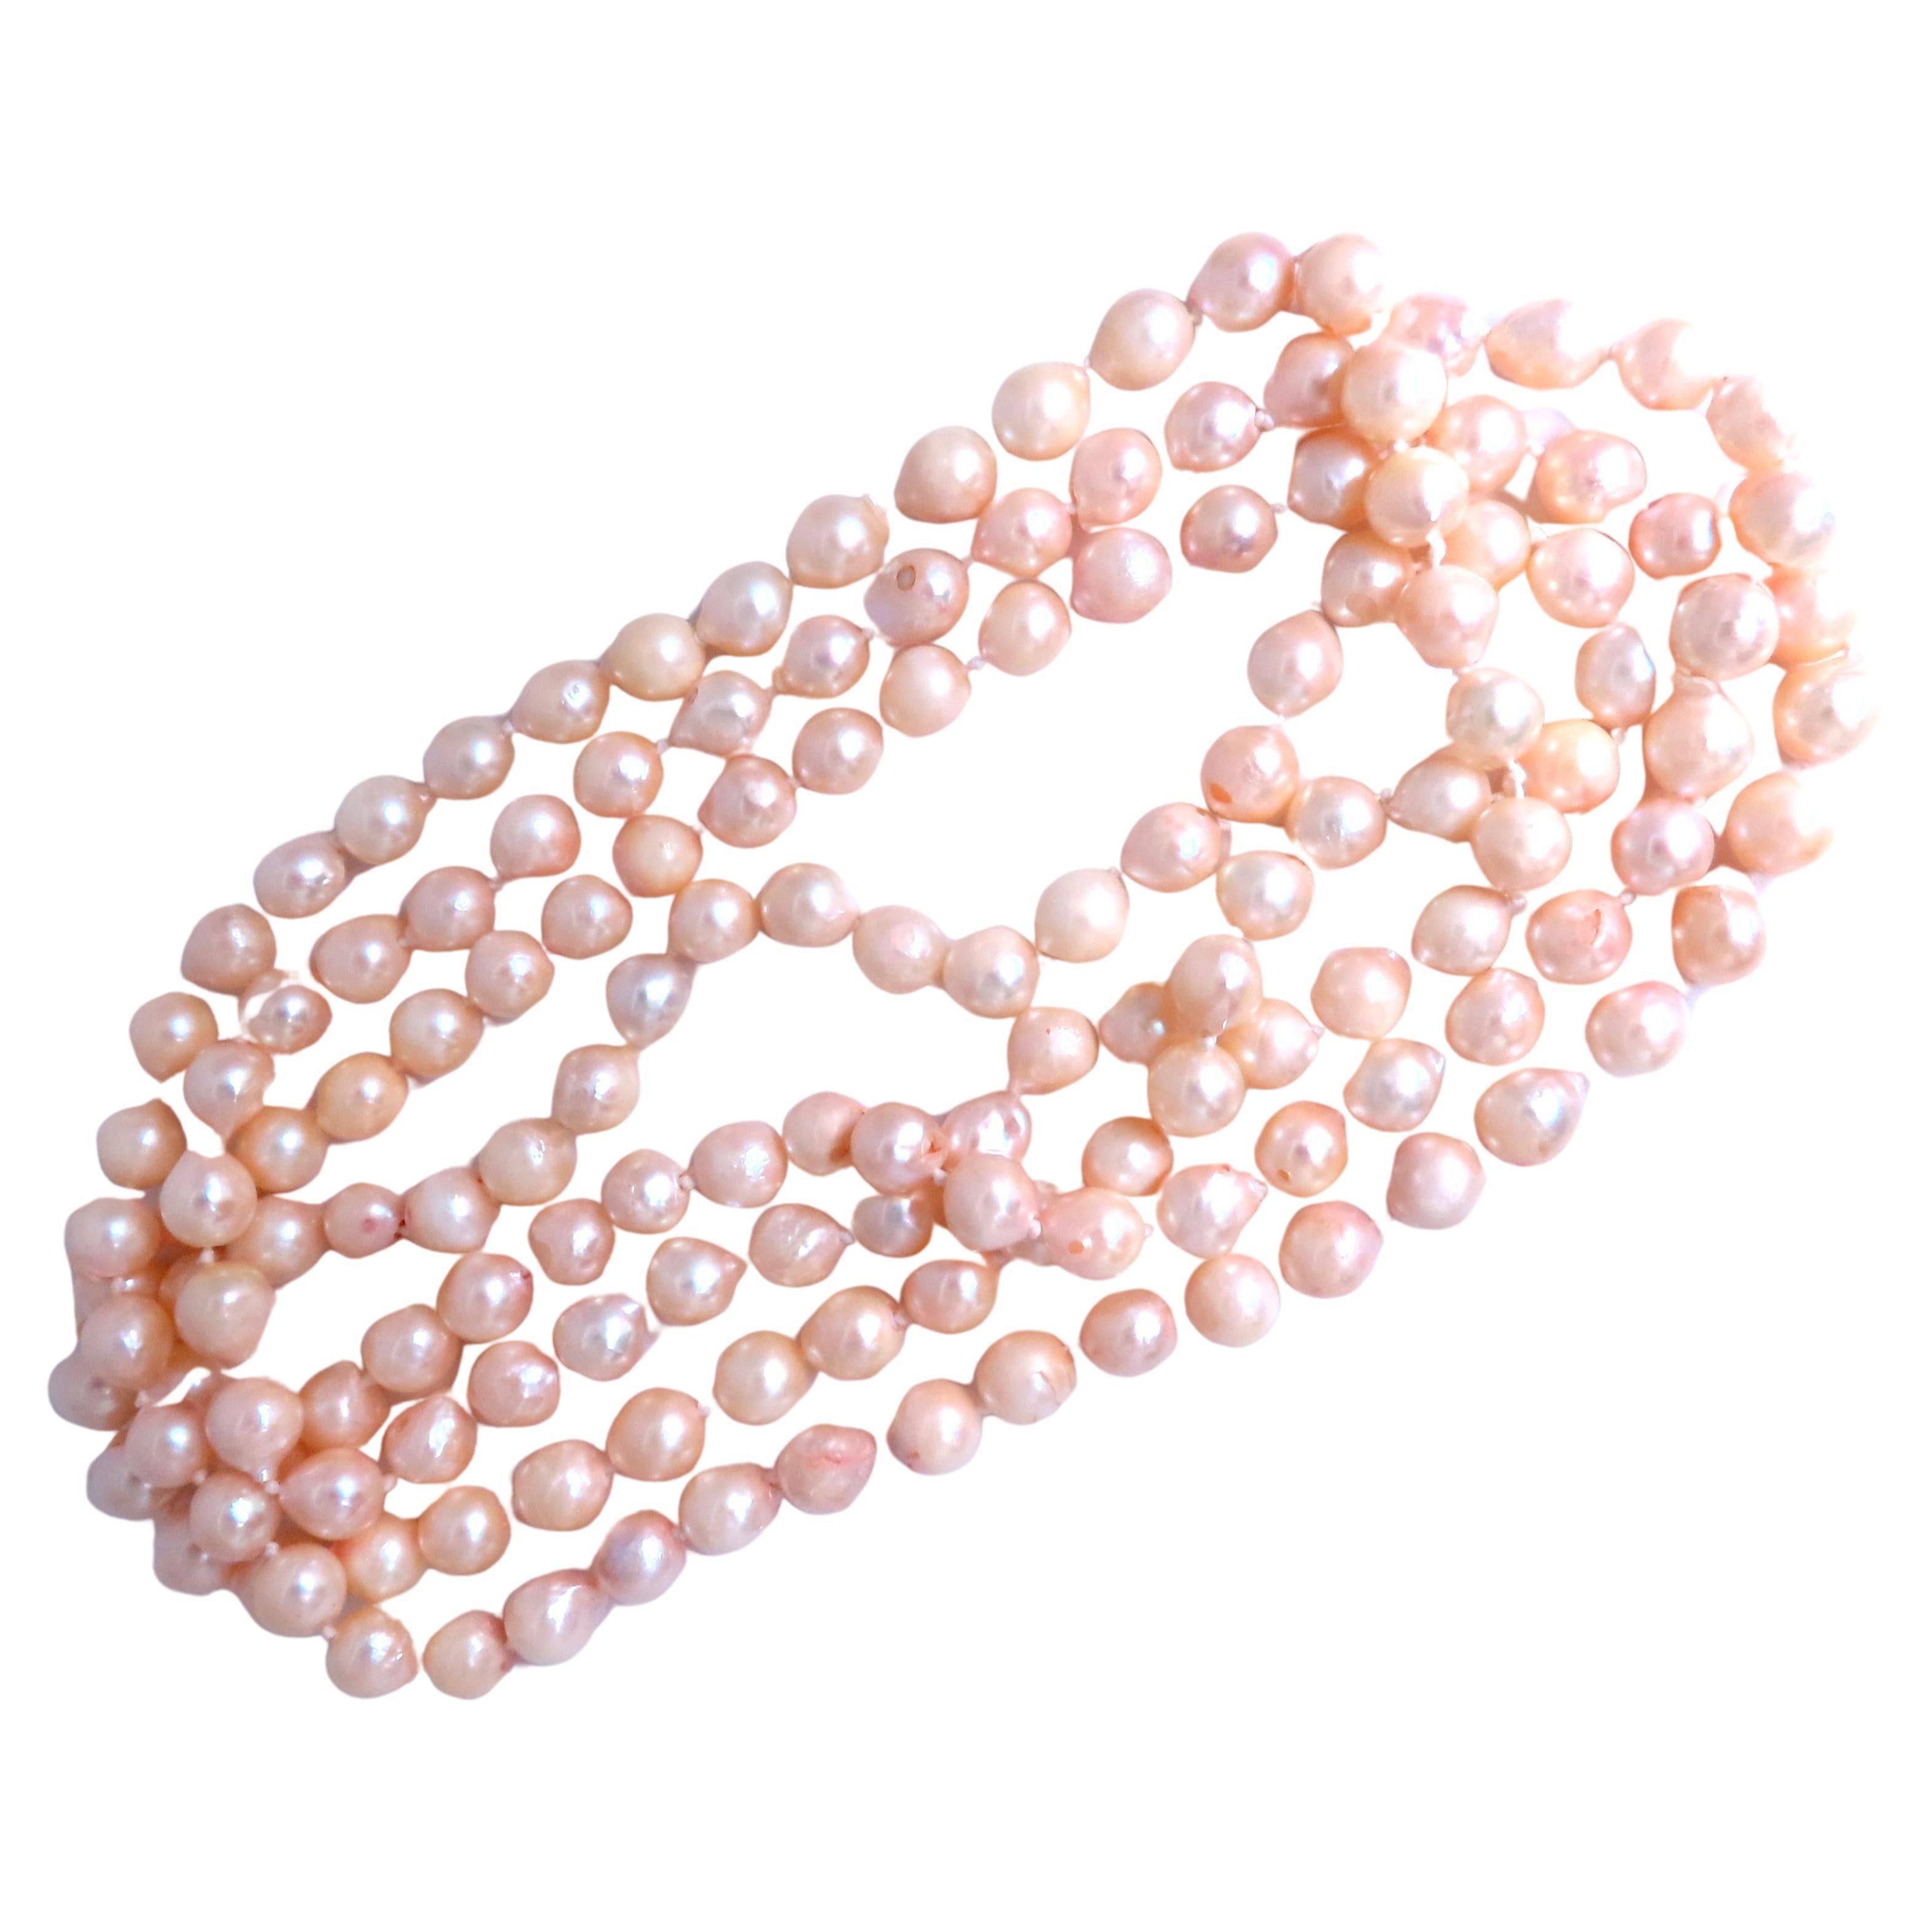 Endless Baroque Pearl Necklace 54 inch 12397 For Sale